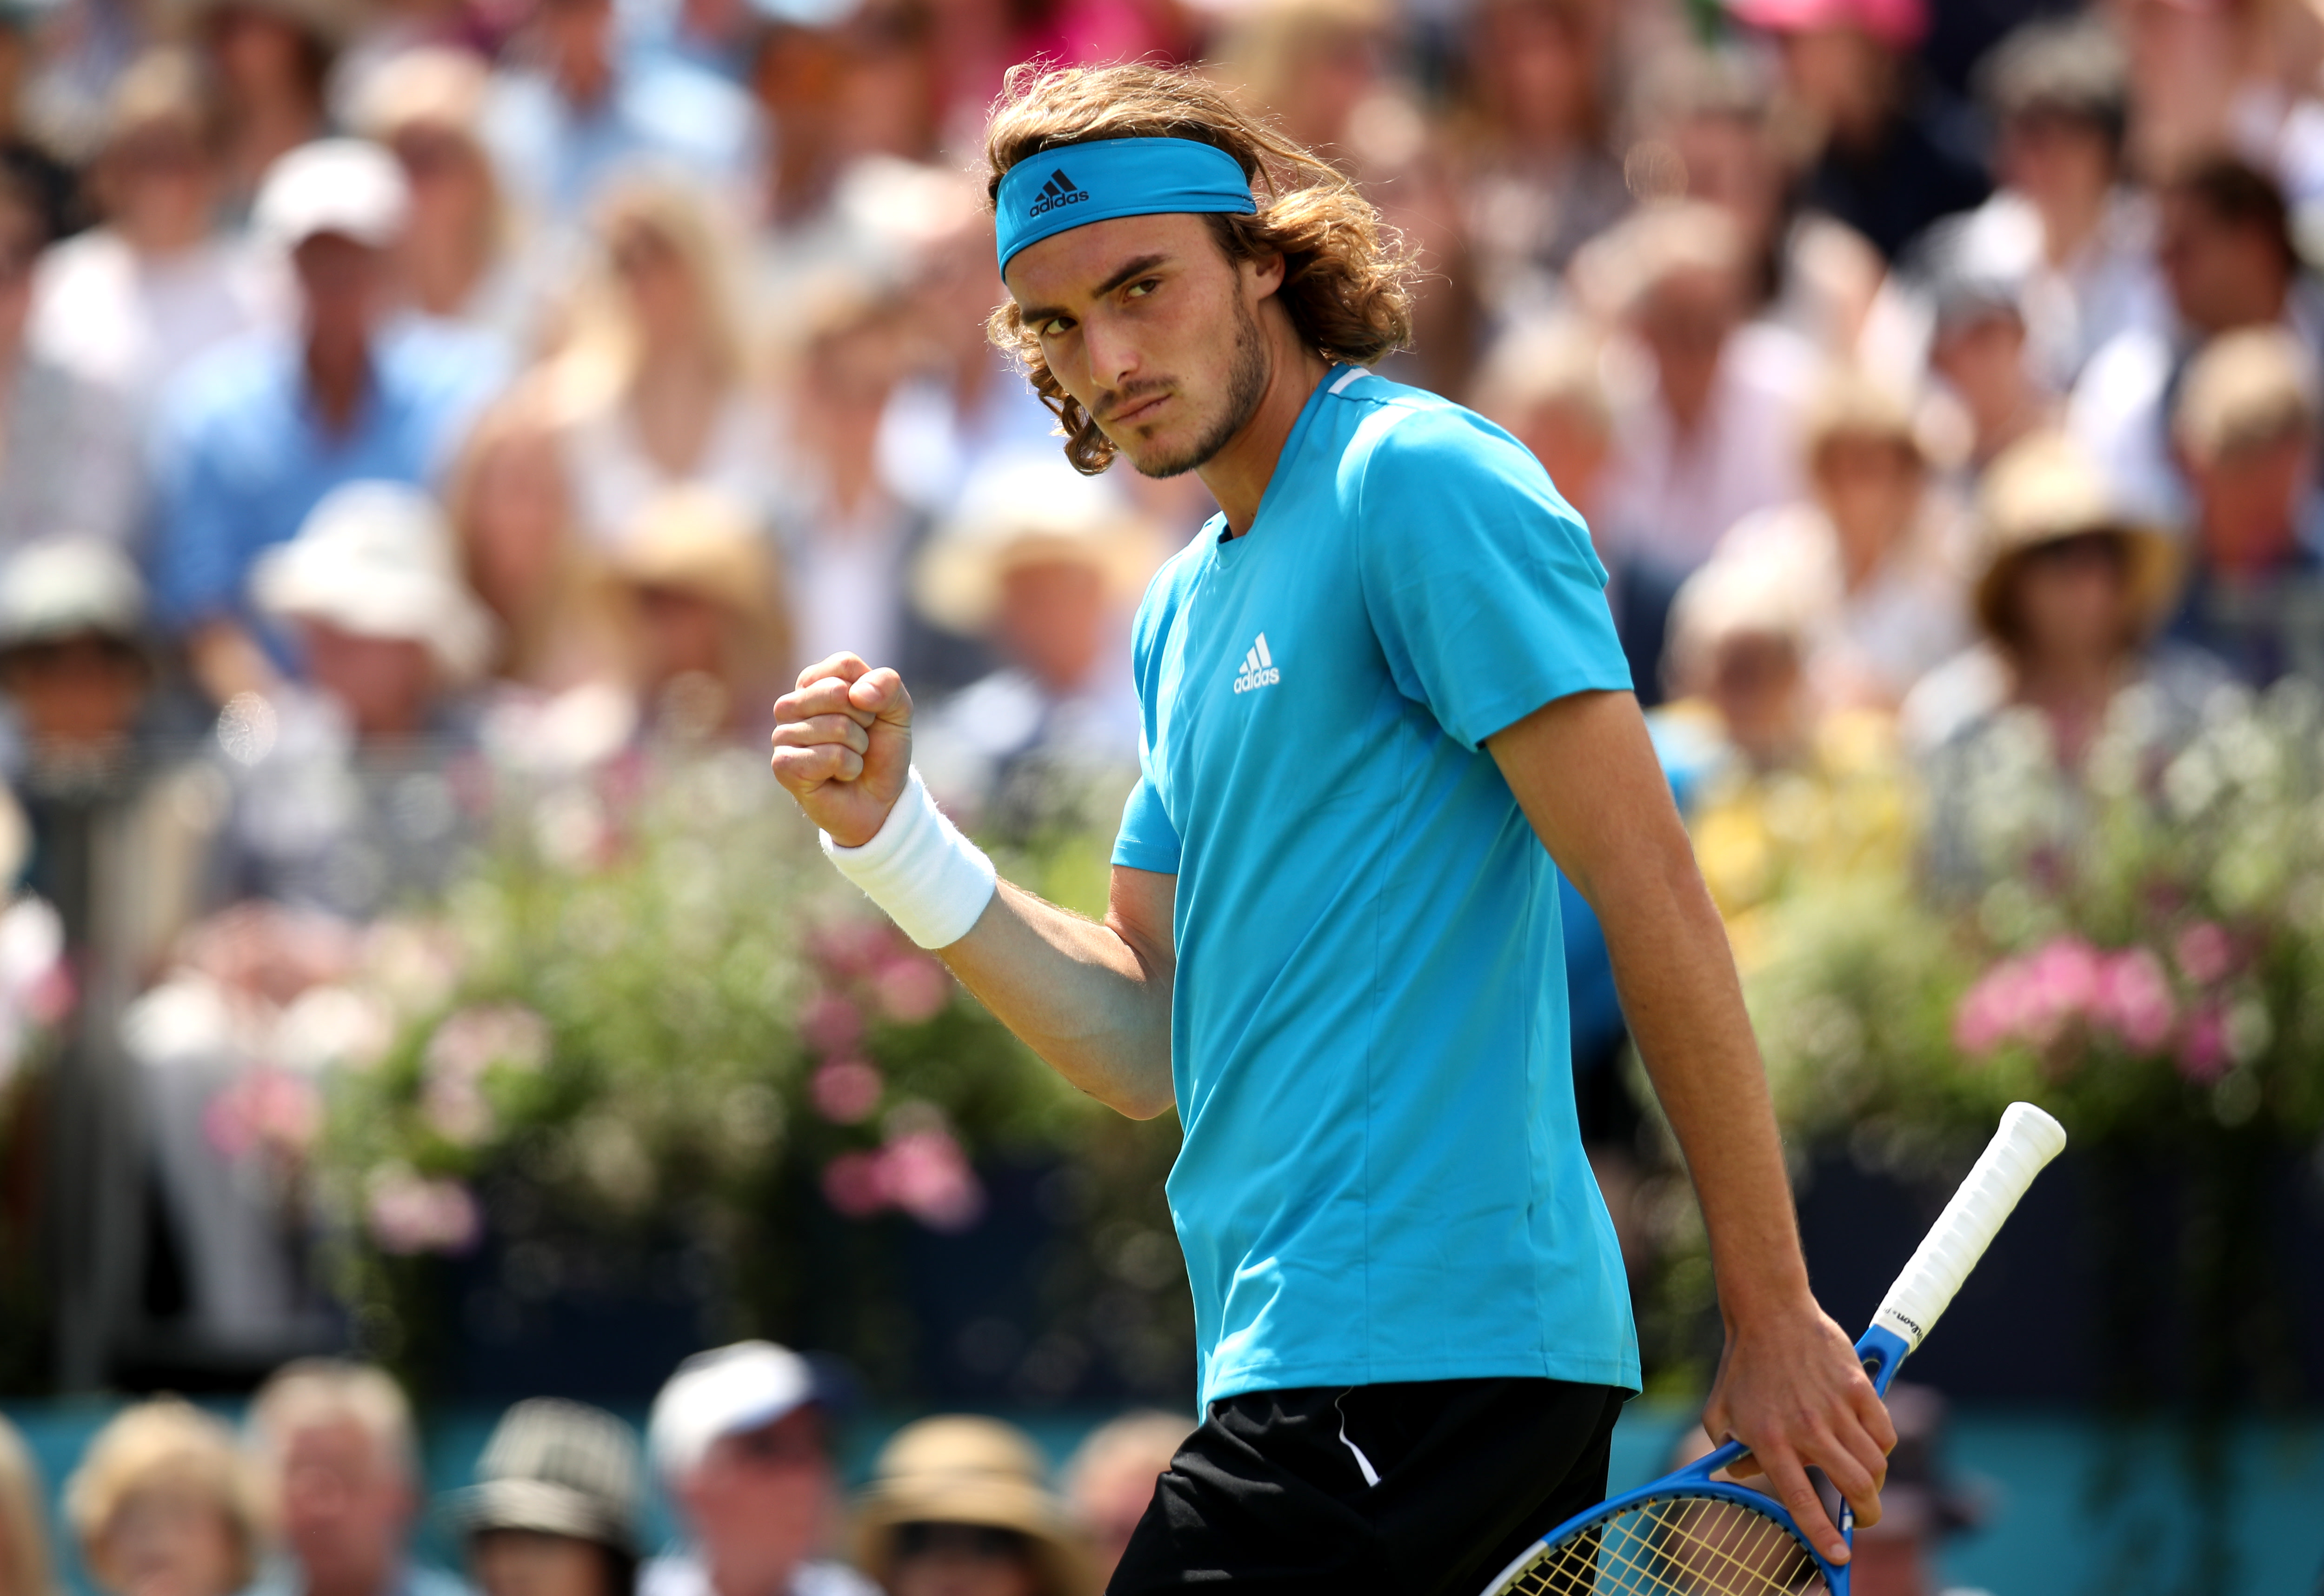 Will this be the summer of Stefanos Tsitsipas?